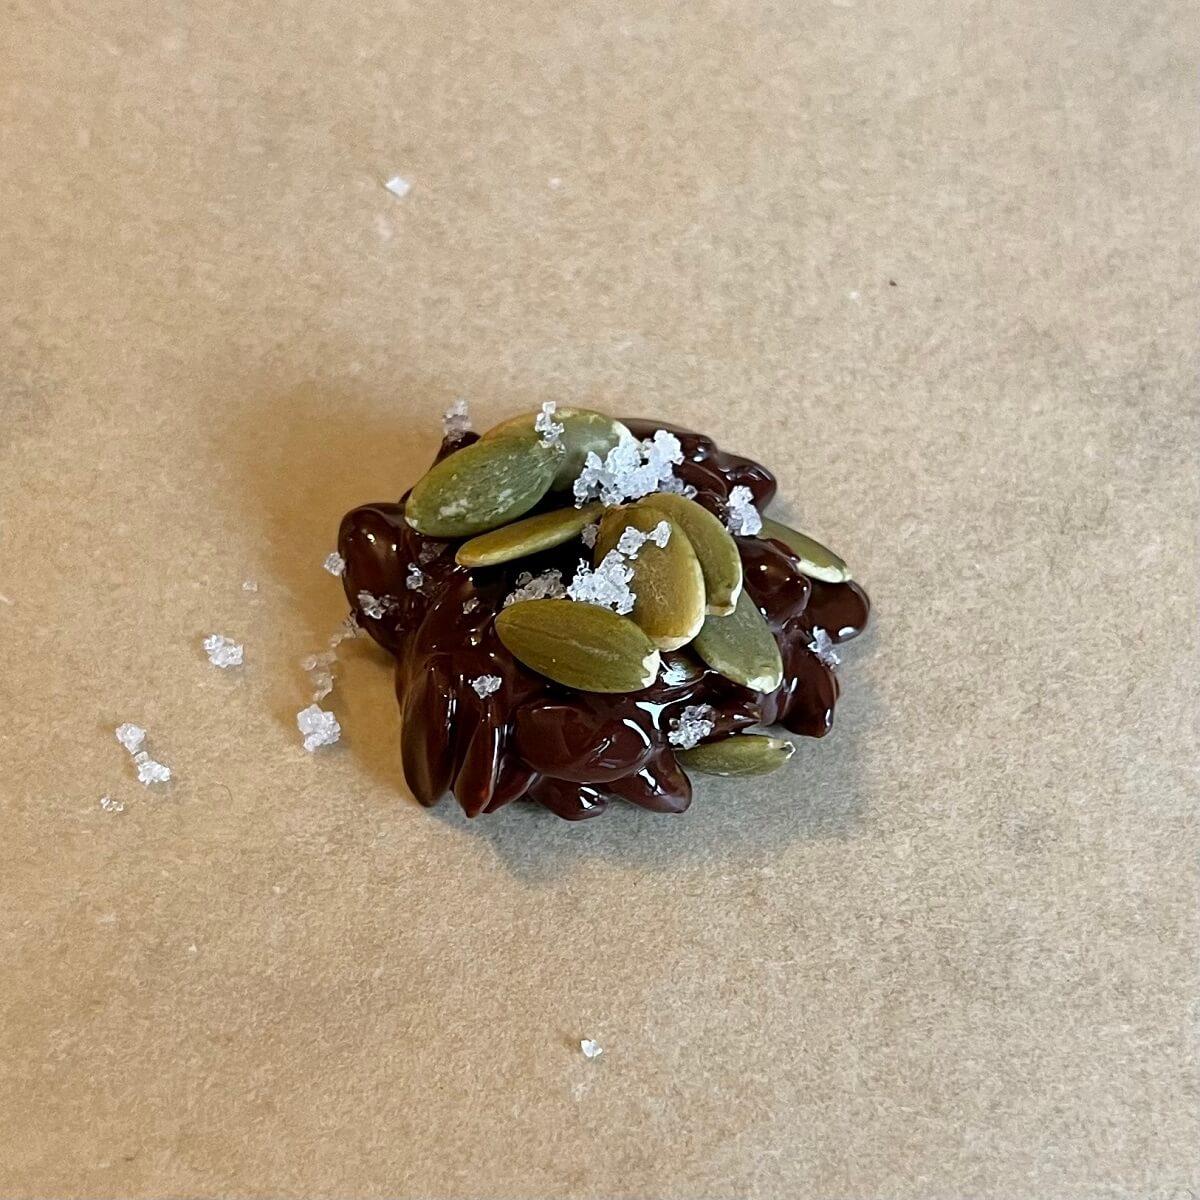 A chocolate pumpkin seed cluster on a piece of parchment paper.